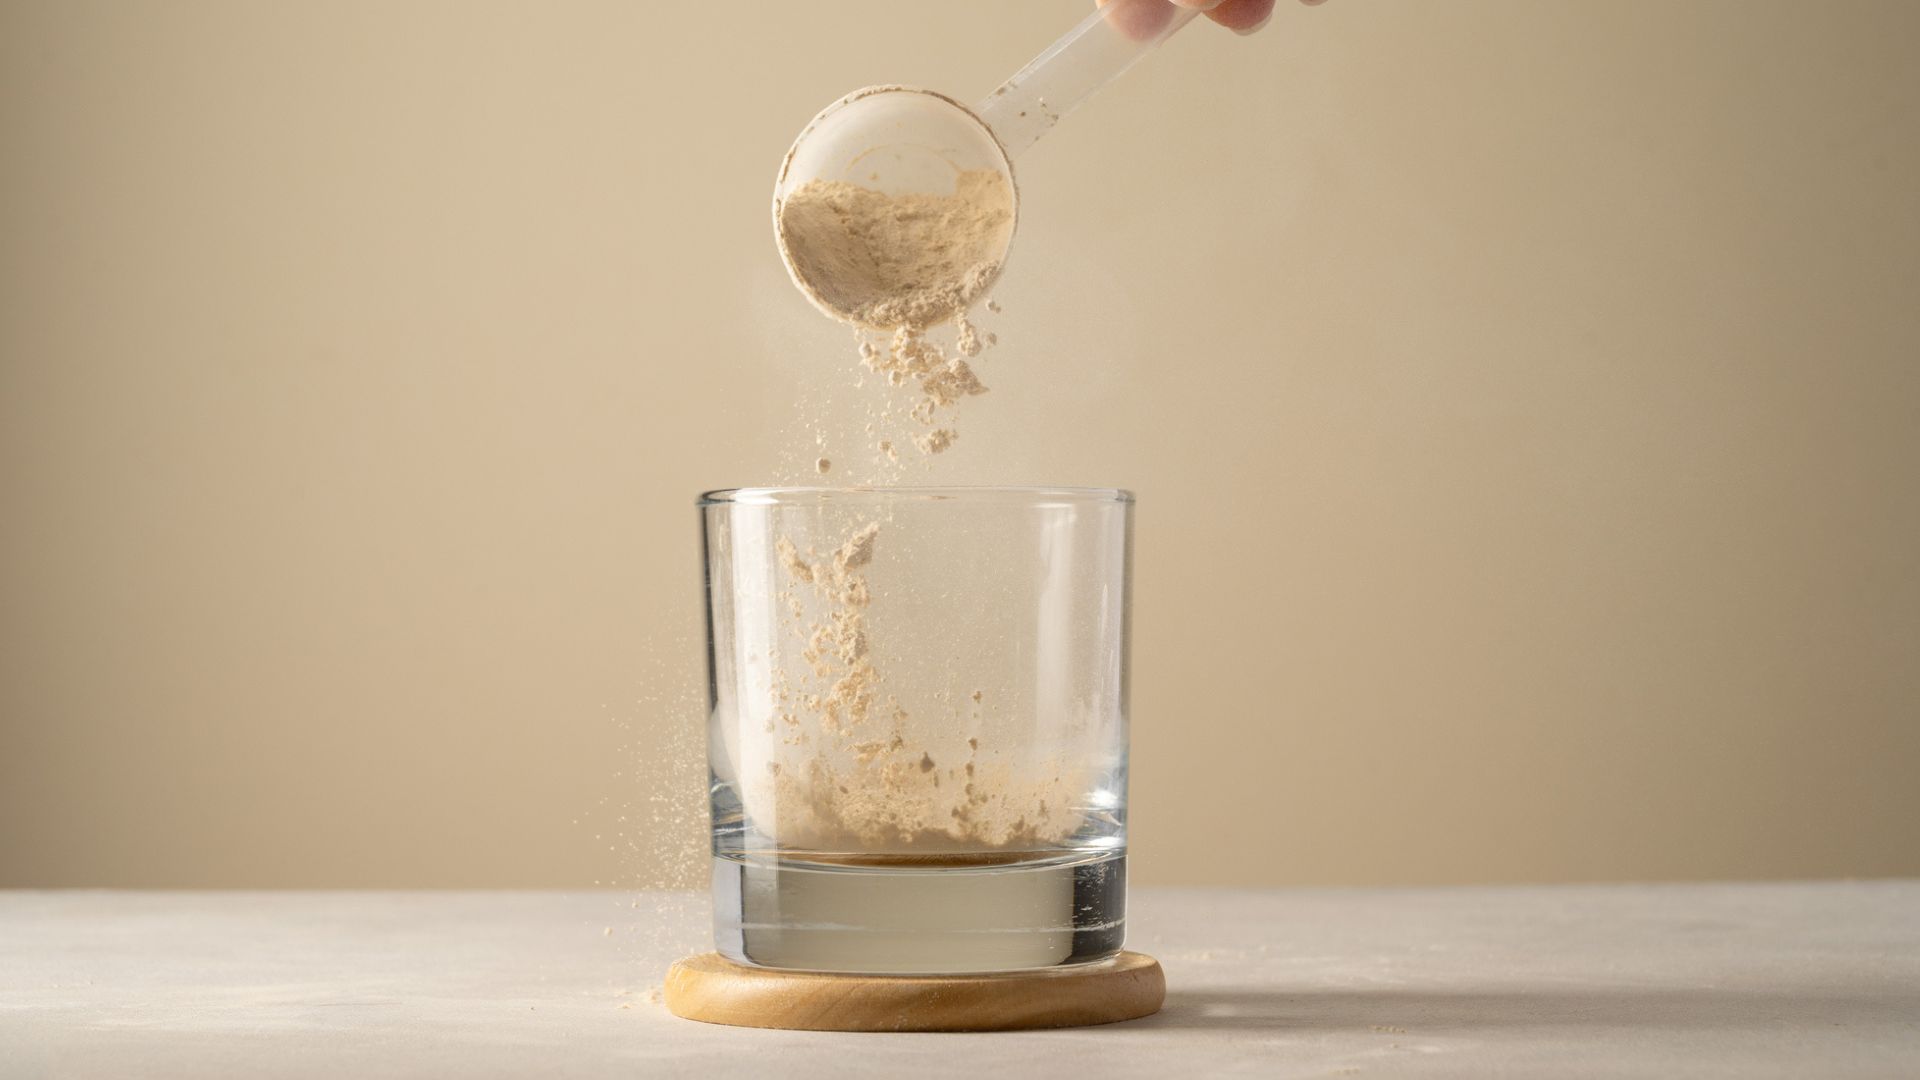 Protein powder in scoop being poured into empty glass